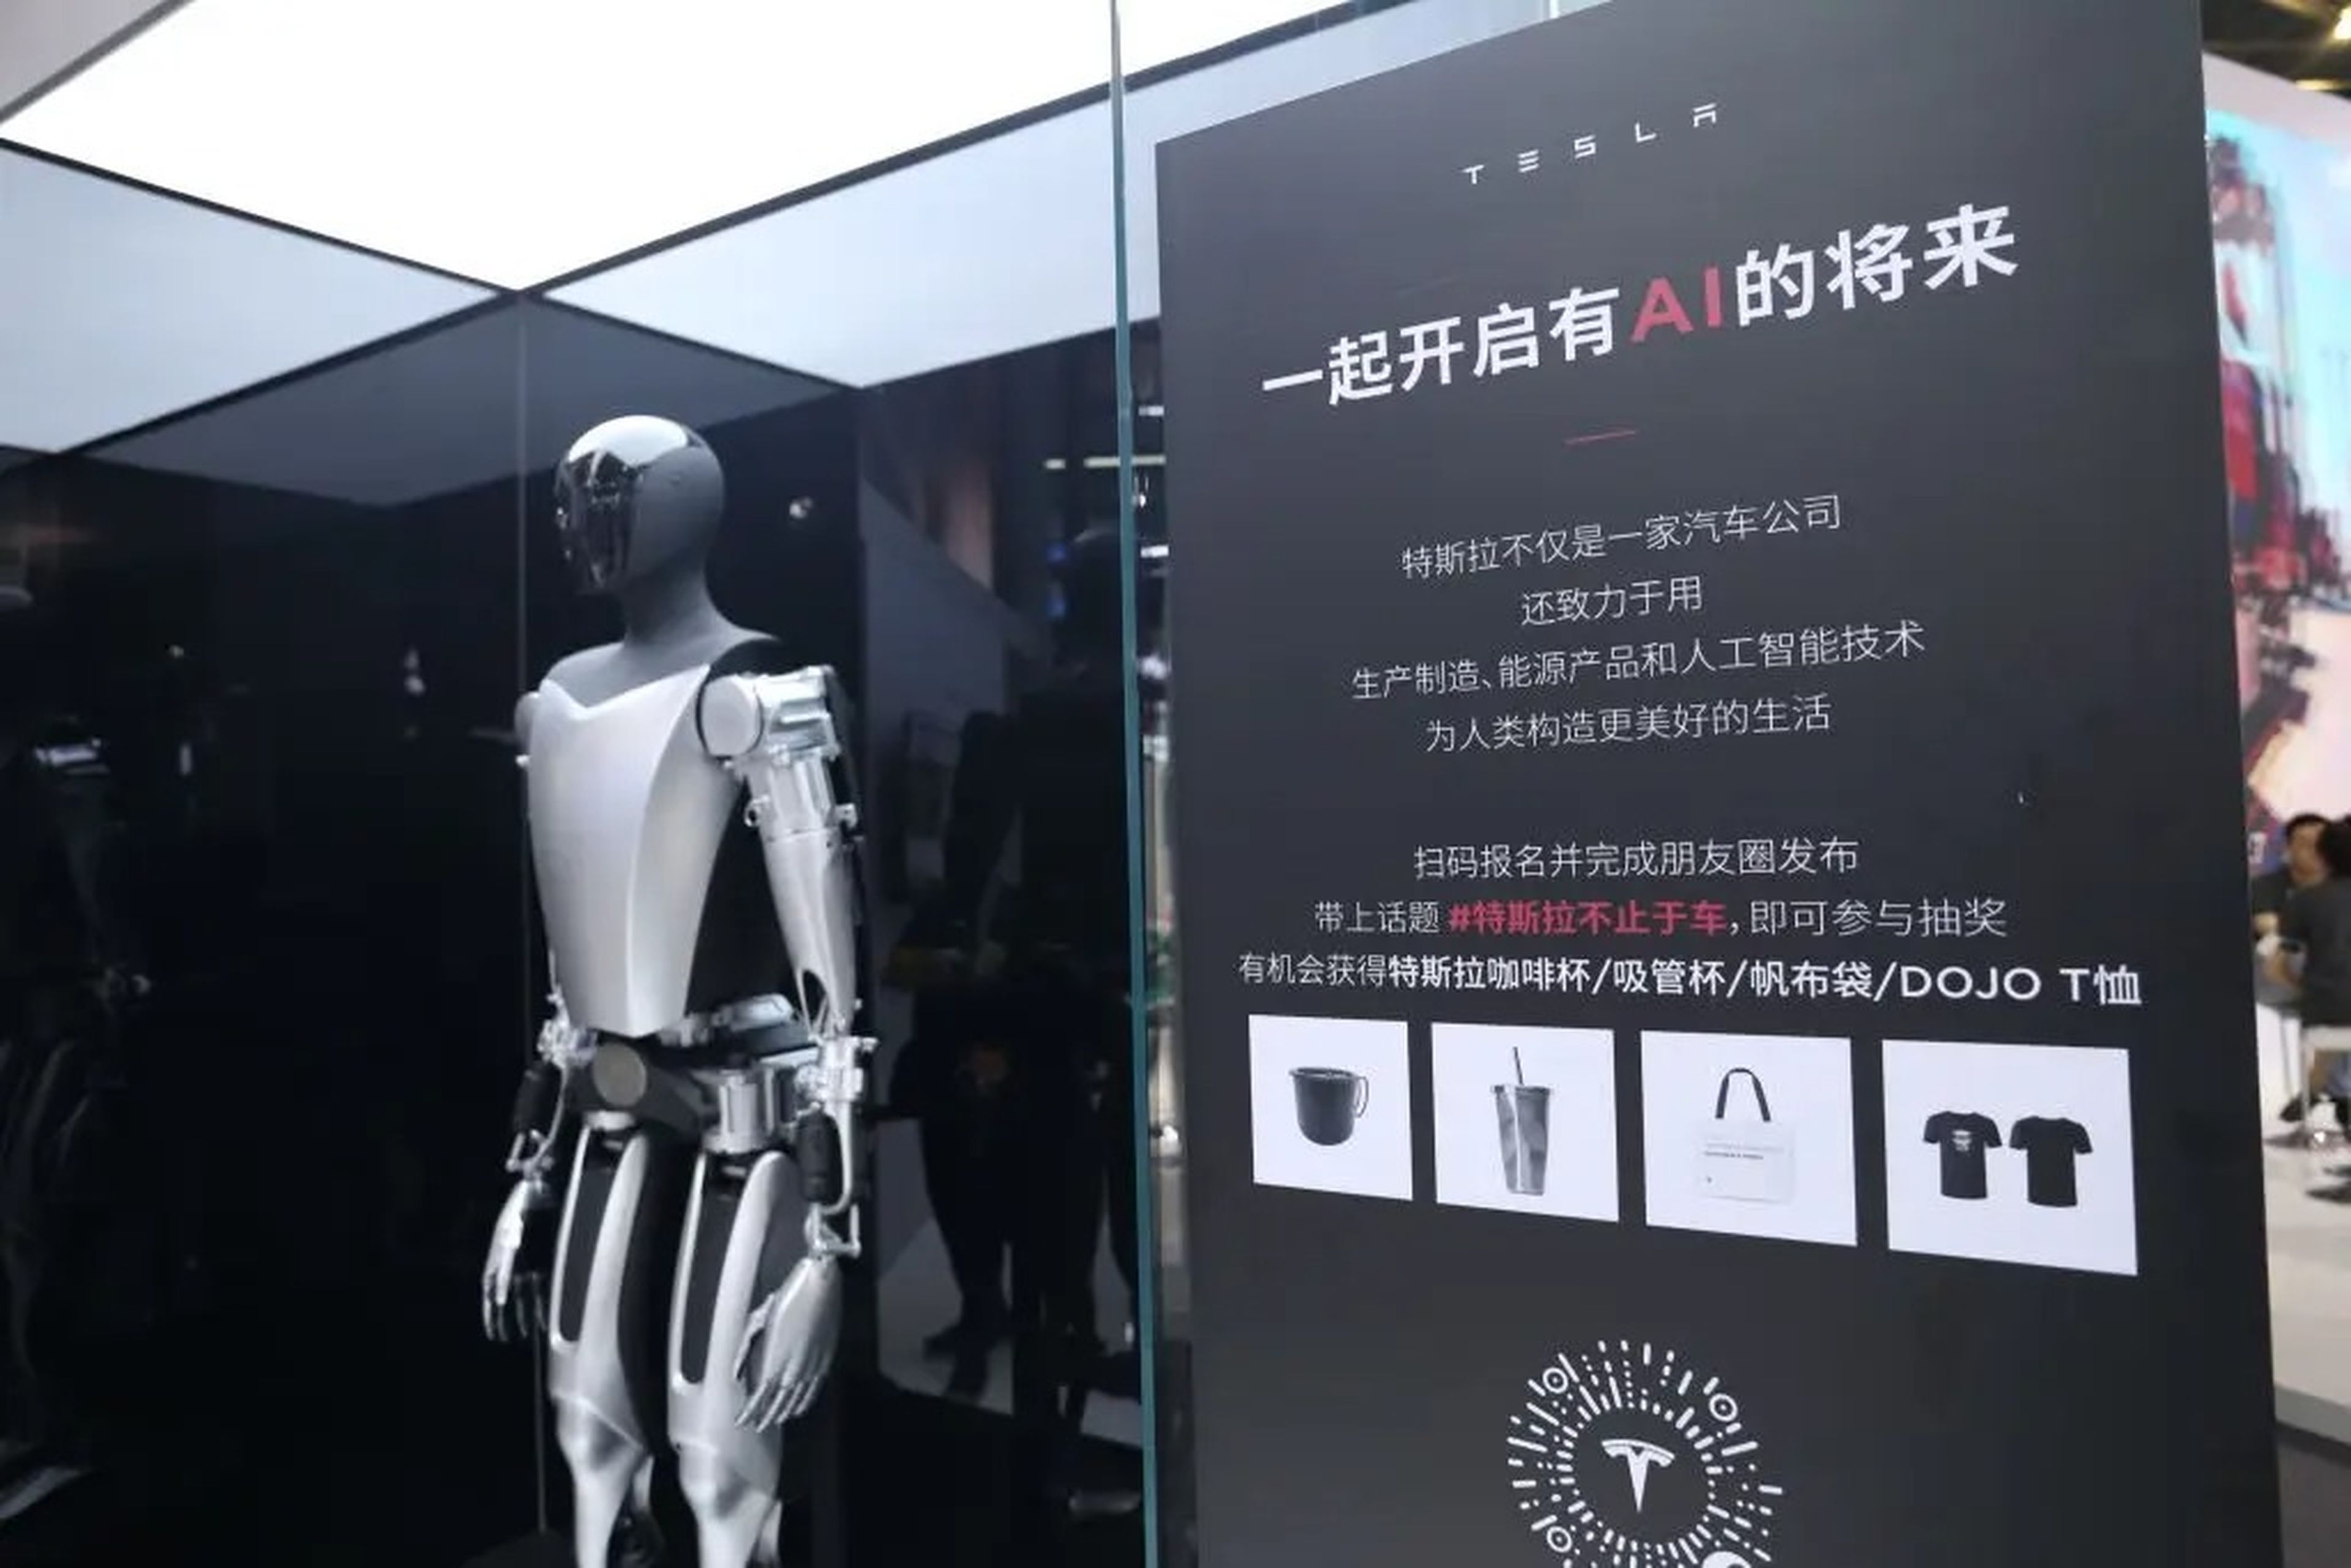 Tesla's robot, "Optimus," being displayed at the 2023 World Artificial Intelligence Conference in Shanghai, China.